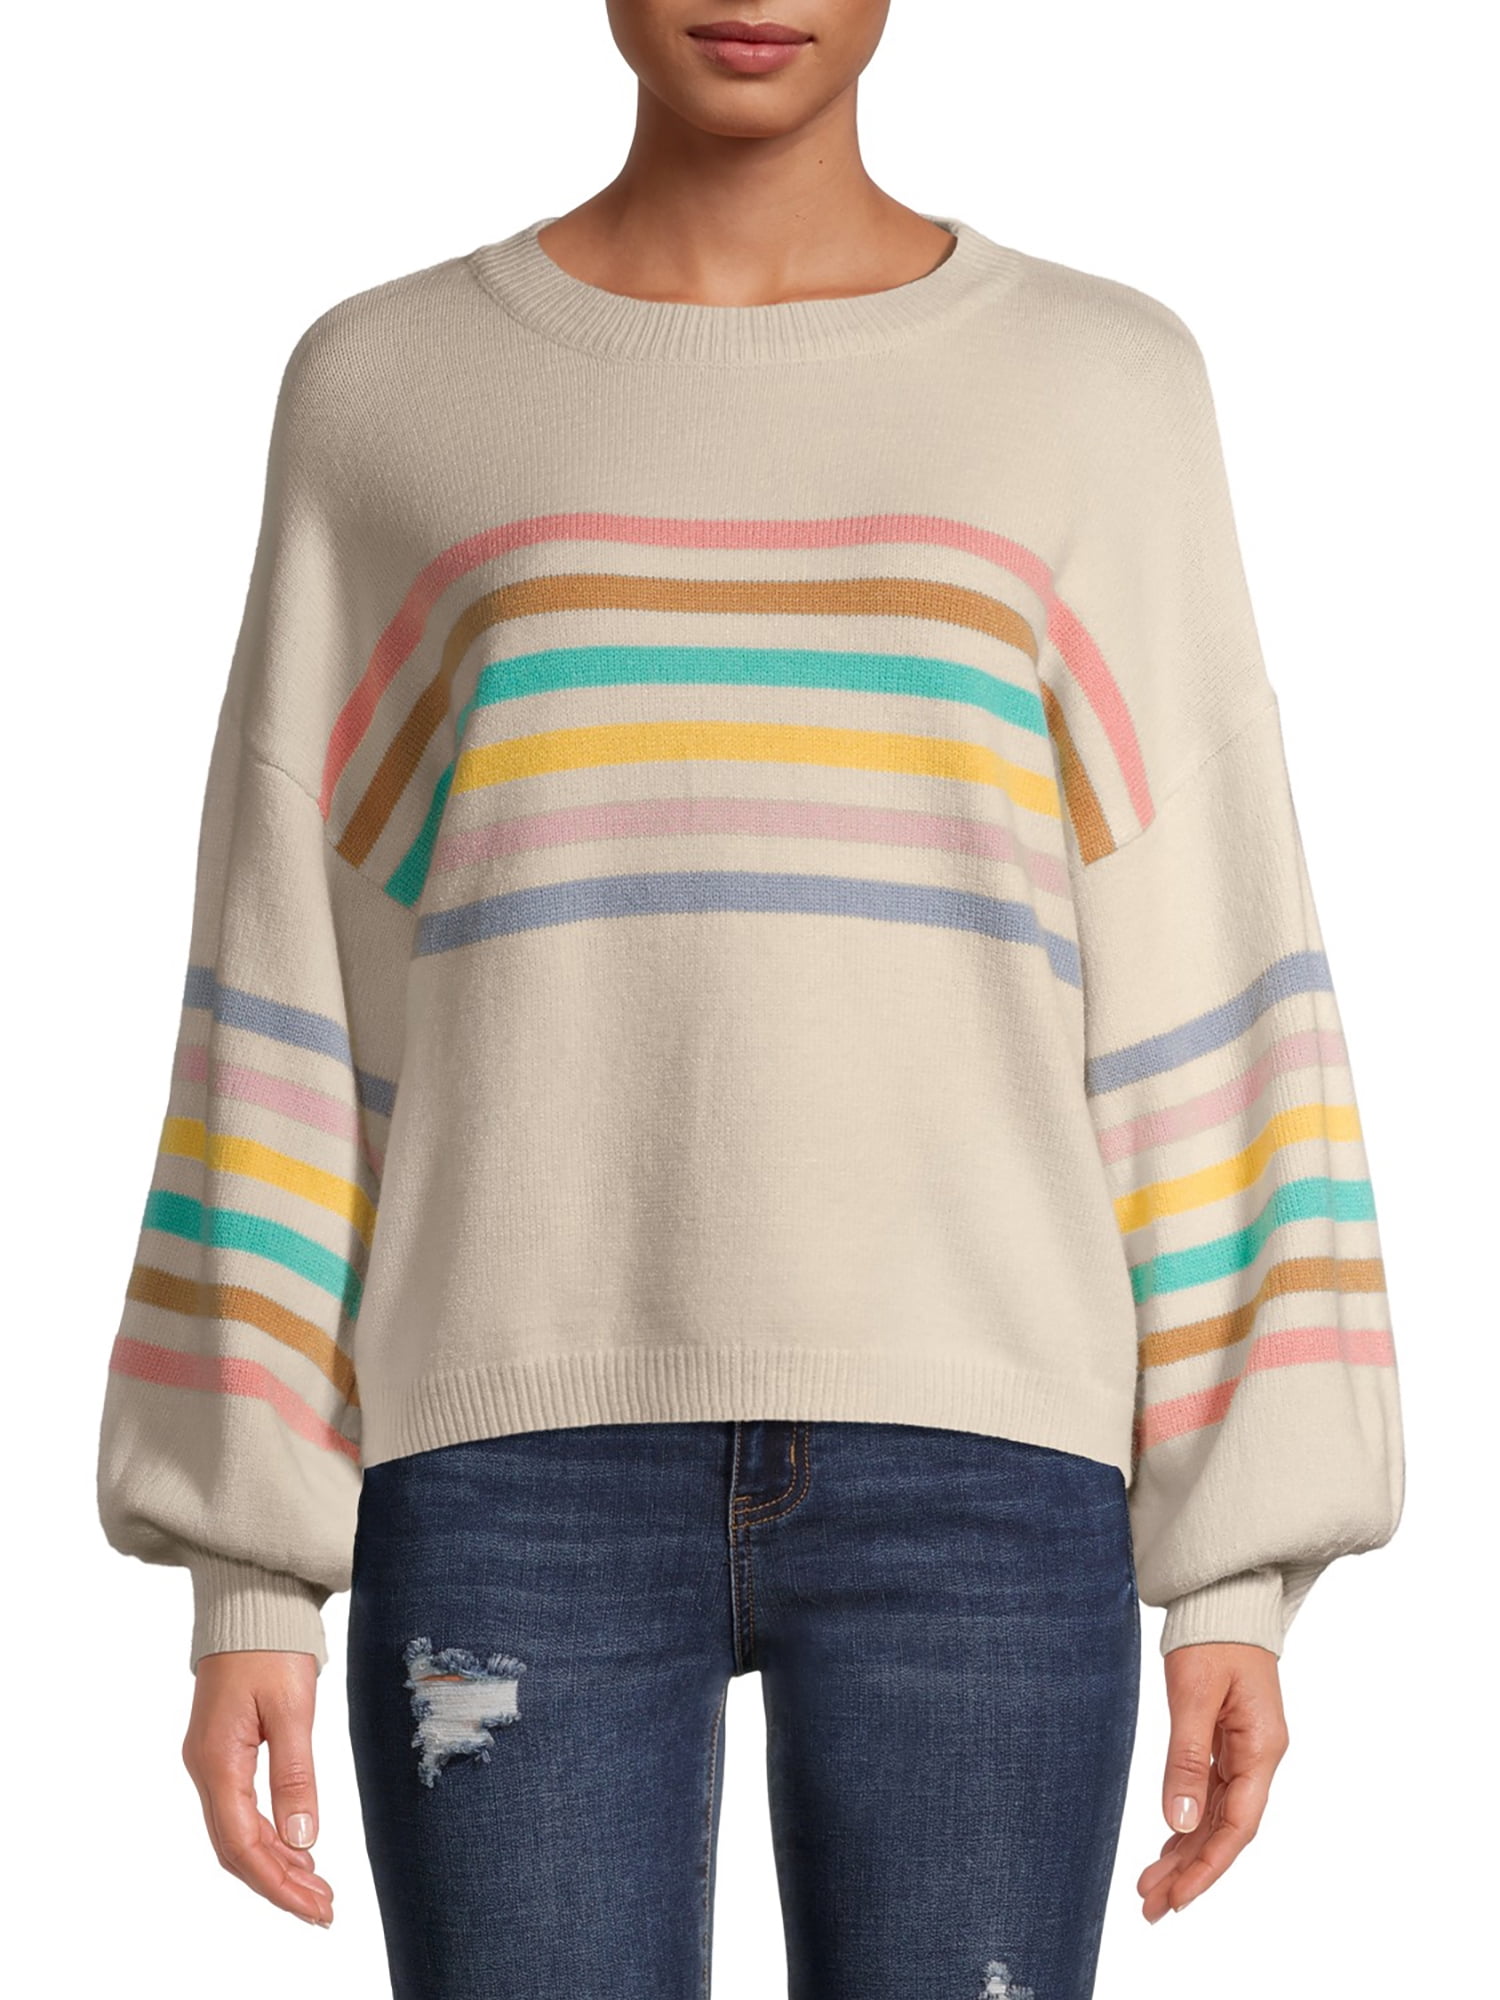 Dreamers by Debut - Debut Women's Rainbow Striped Puff Sleeve Sweater ...